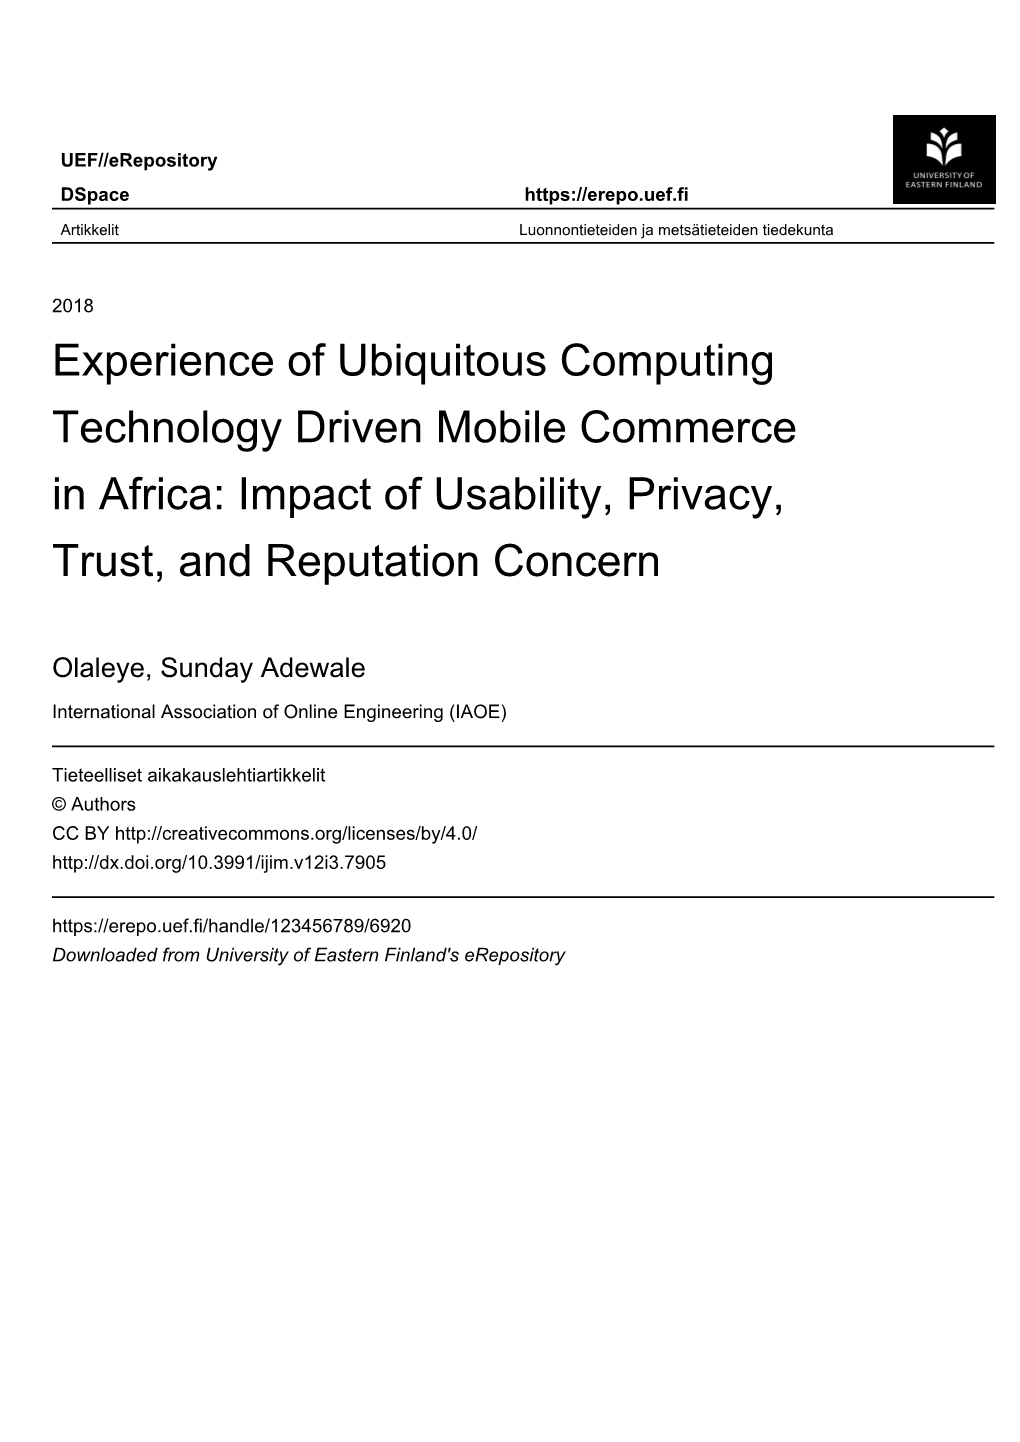 Experience of Ubiquitous Computing Technology Driven Mobile Commerce in Africa: Impact of Usability, Privacy, Trust, and Reputation Concern